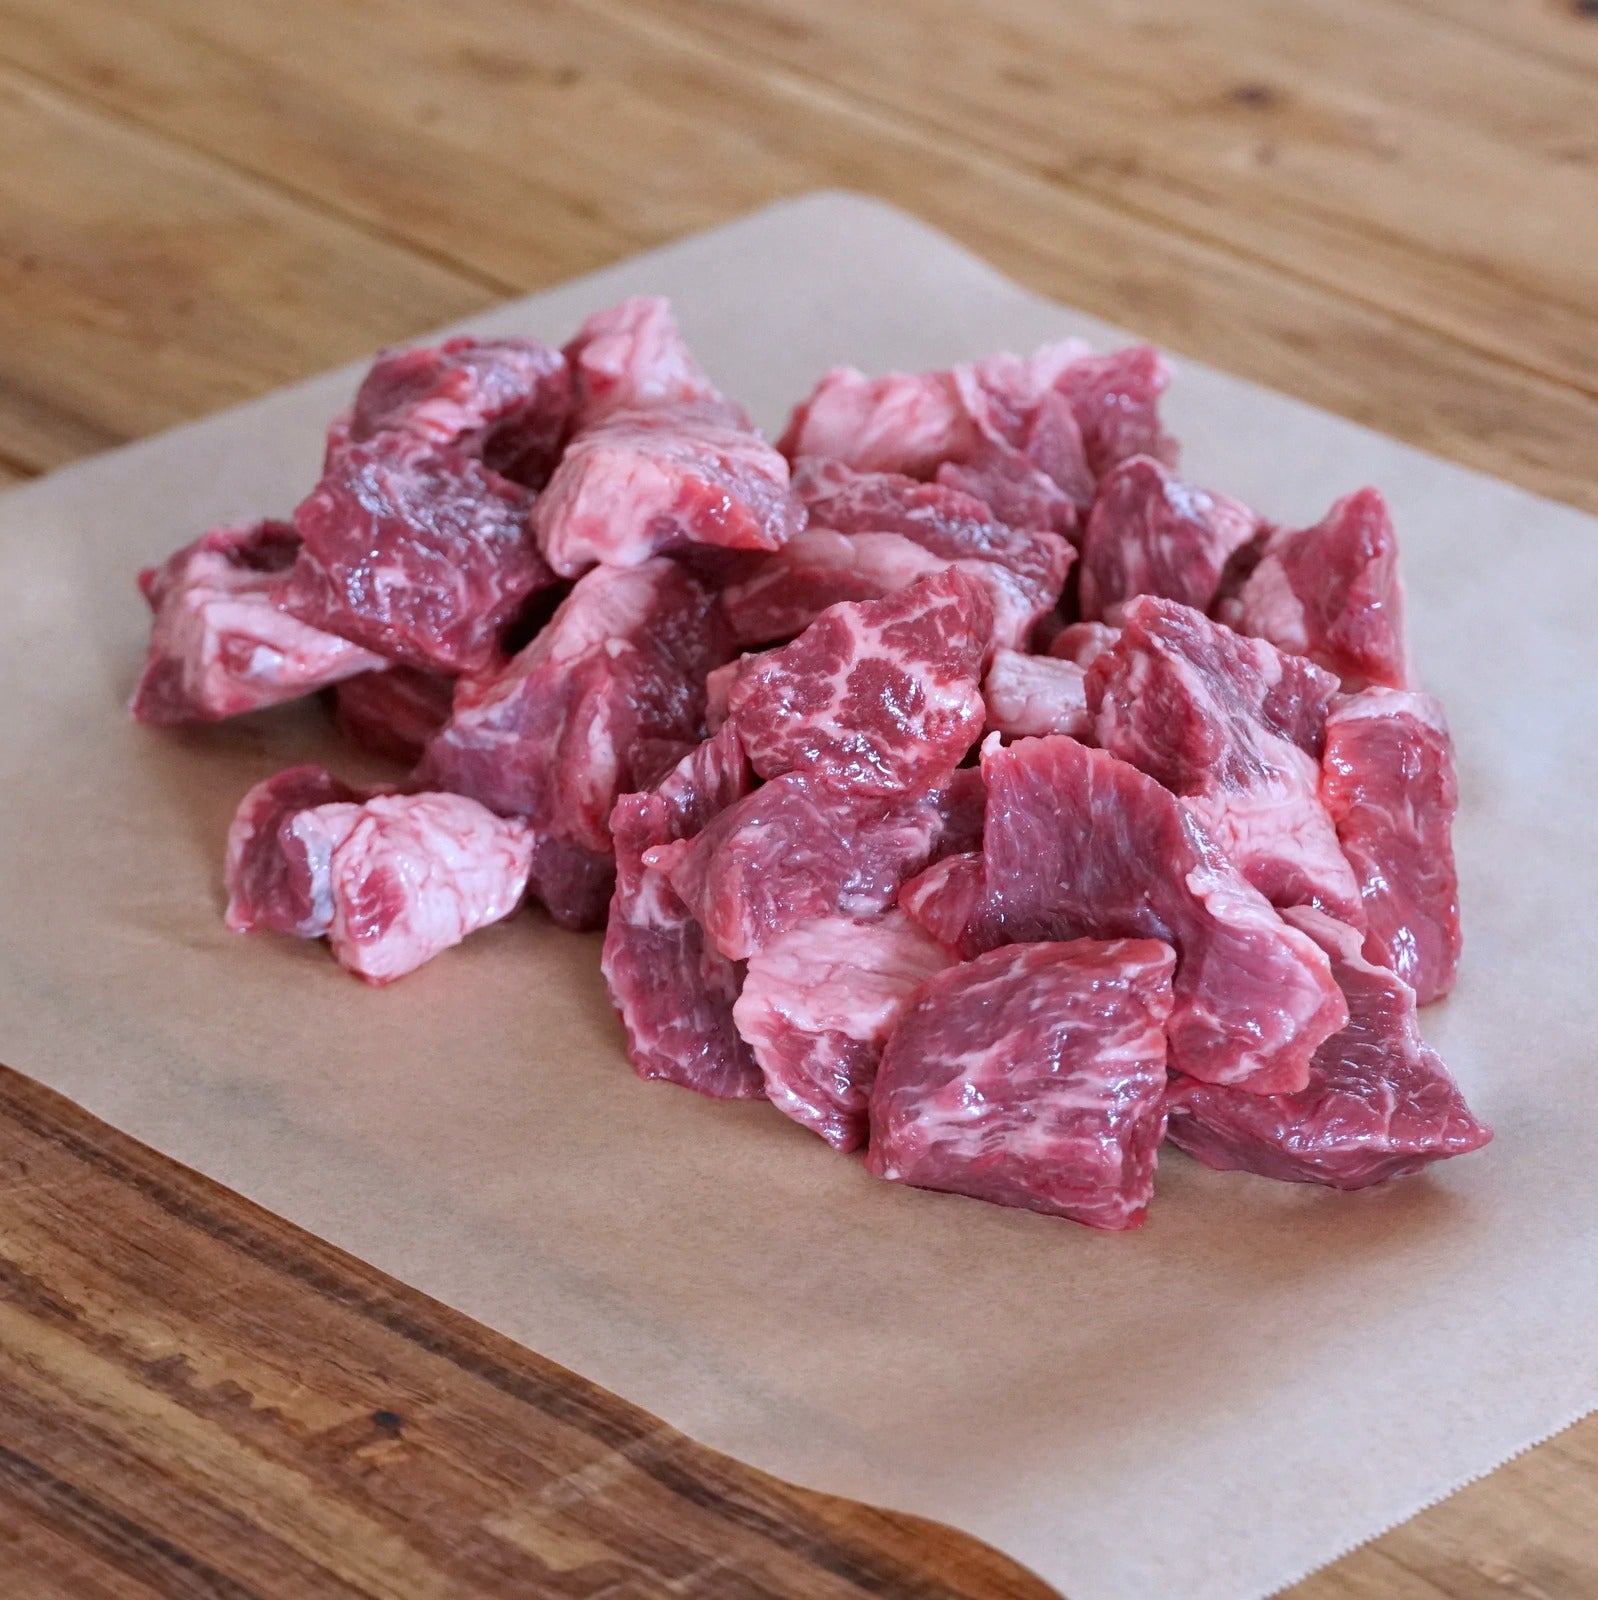 (Limited Sale 20% OFF) Grain-Fed Beef Stew Cuts New Zealand (450g) - Horizon Farms